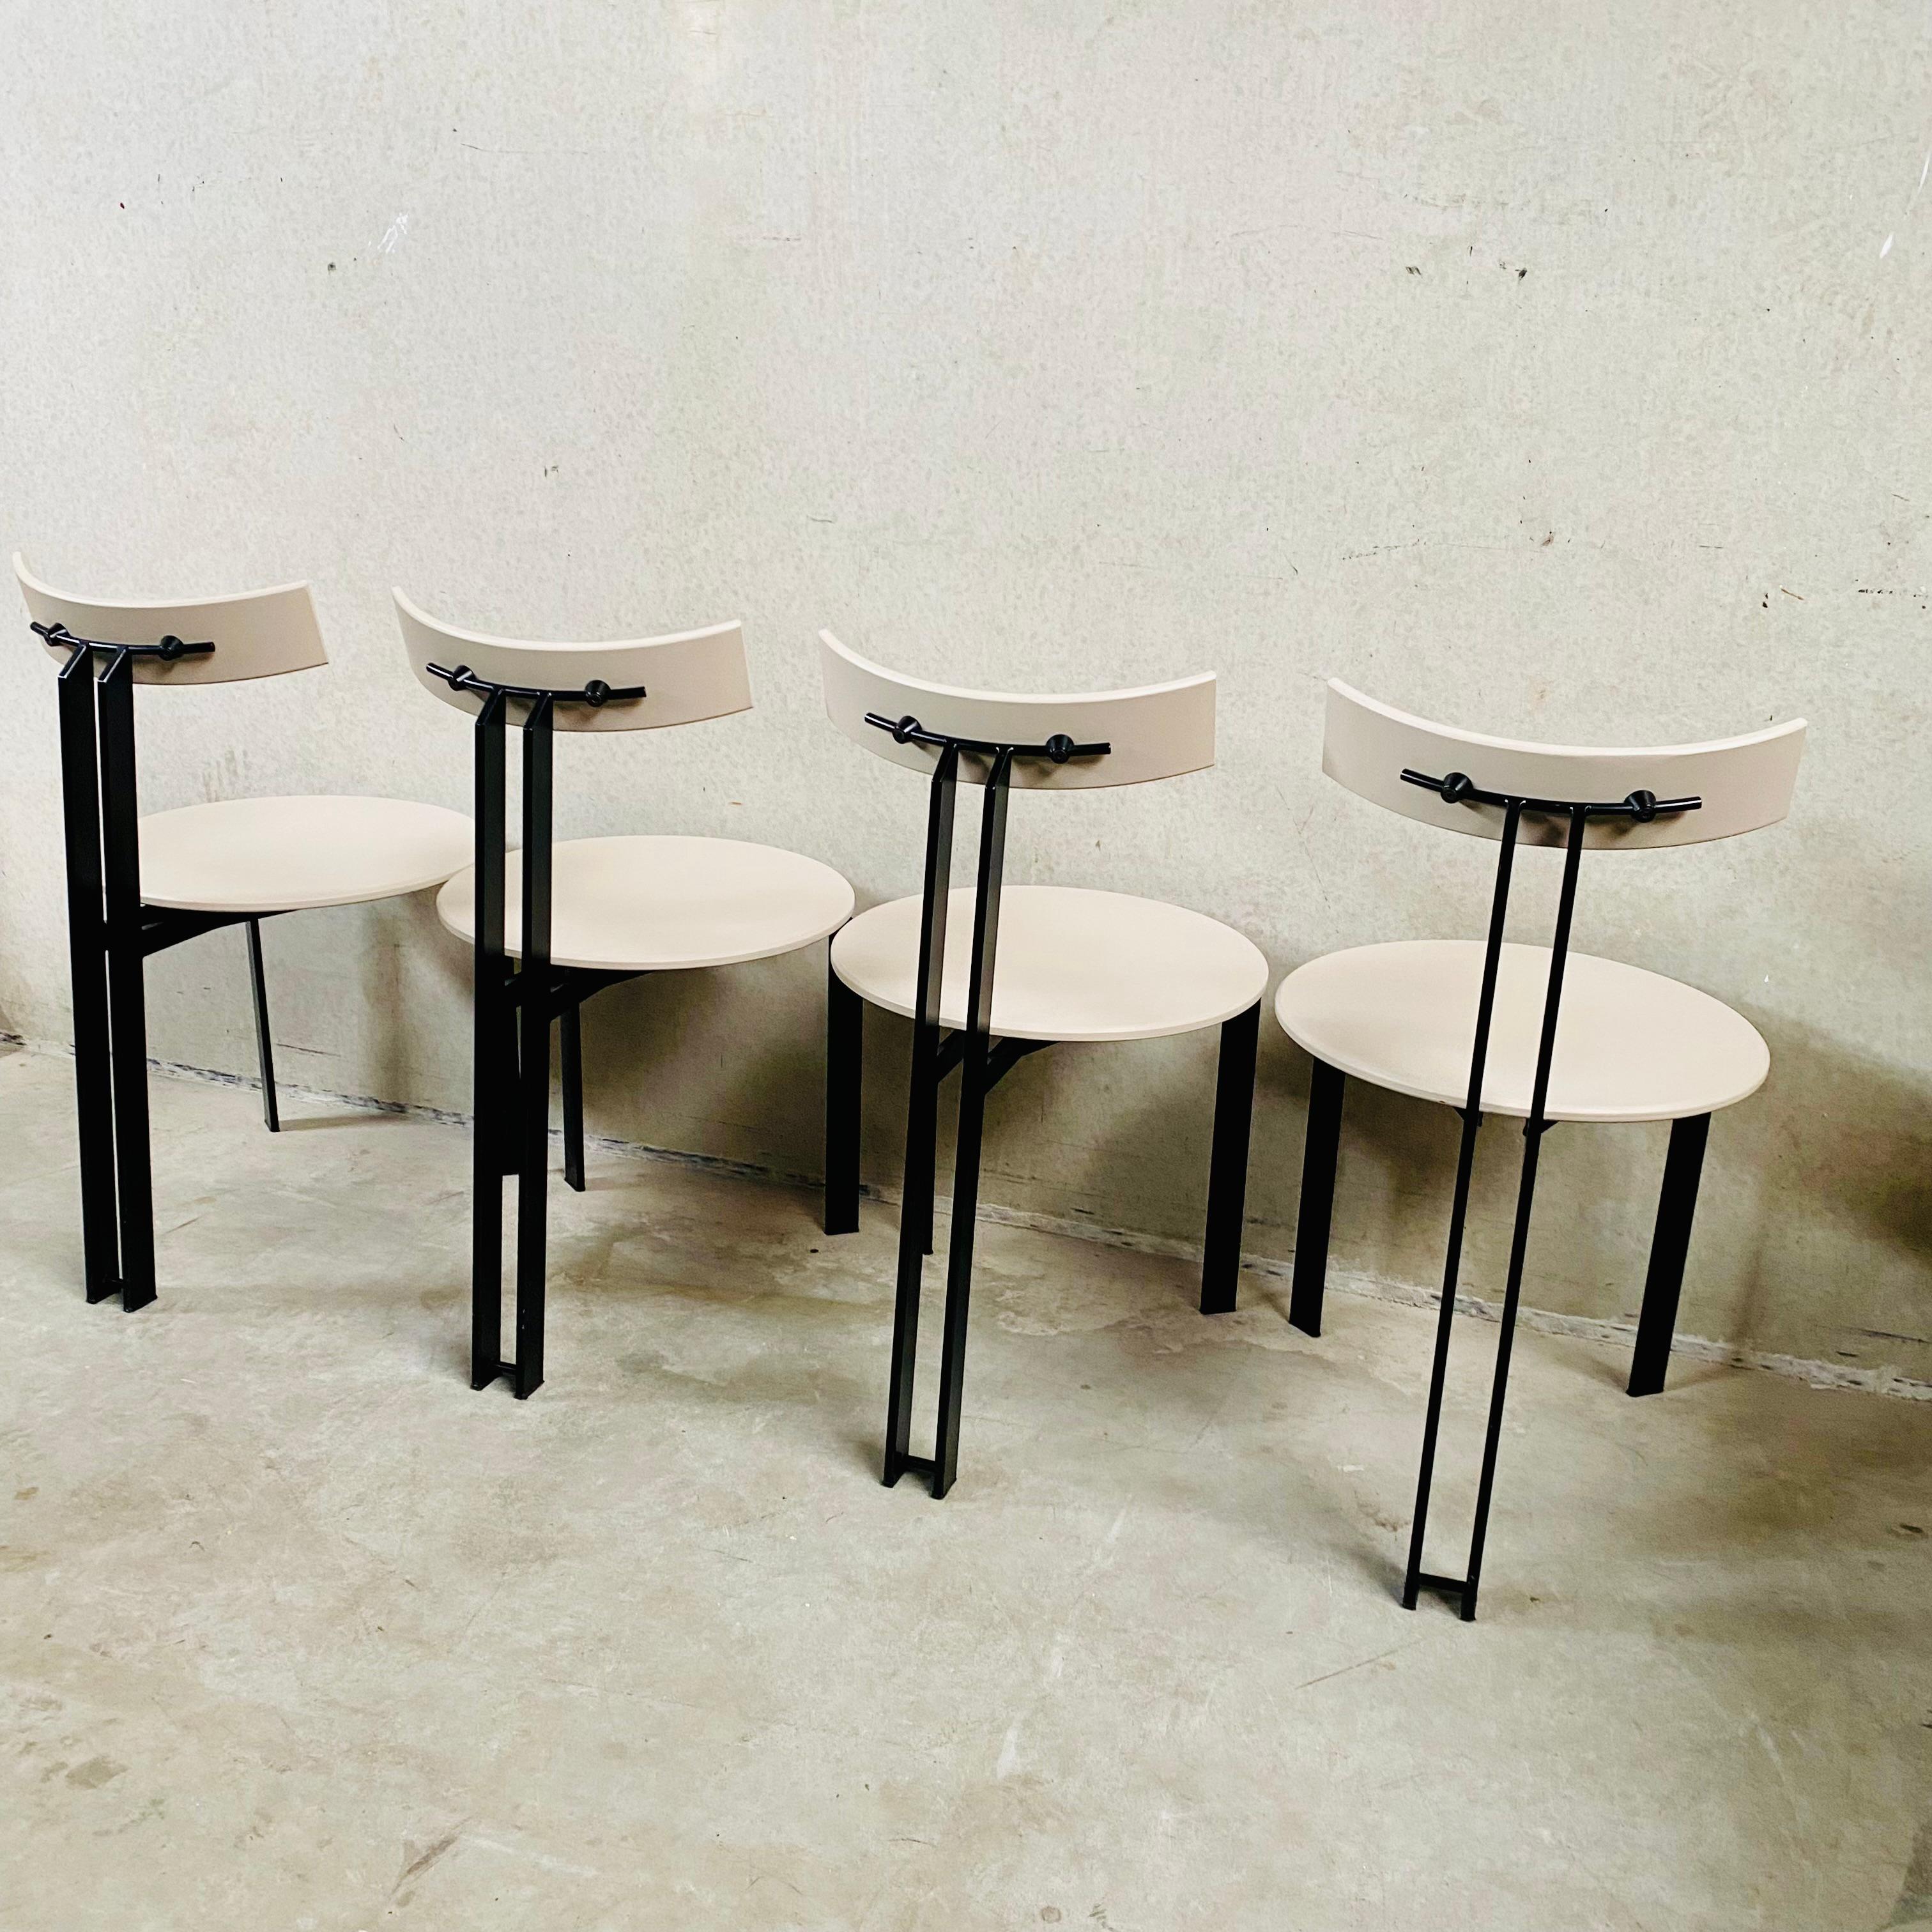 4 x Brutalist ZETA Dining Chairs by Martin Haksteen for Harvink, Netherlands  For Sale 3